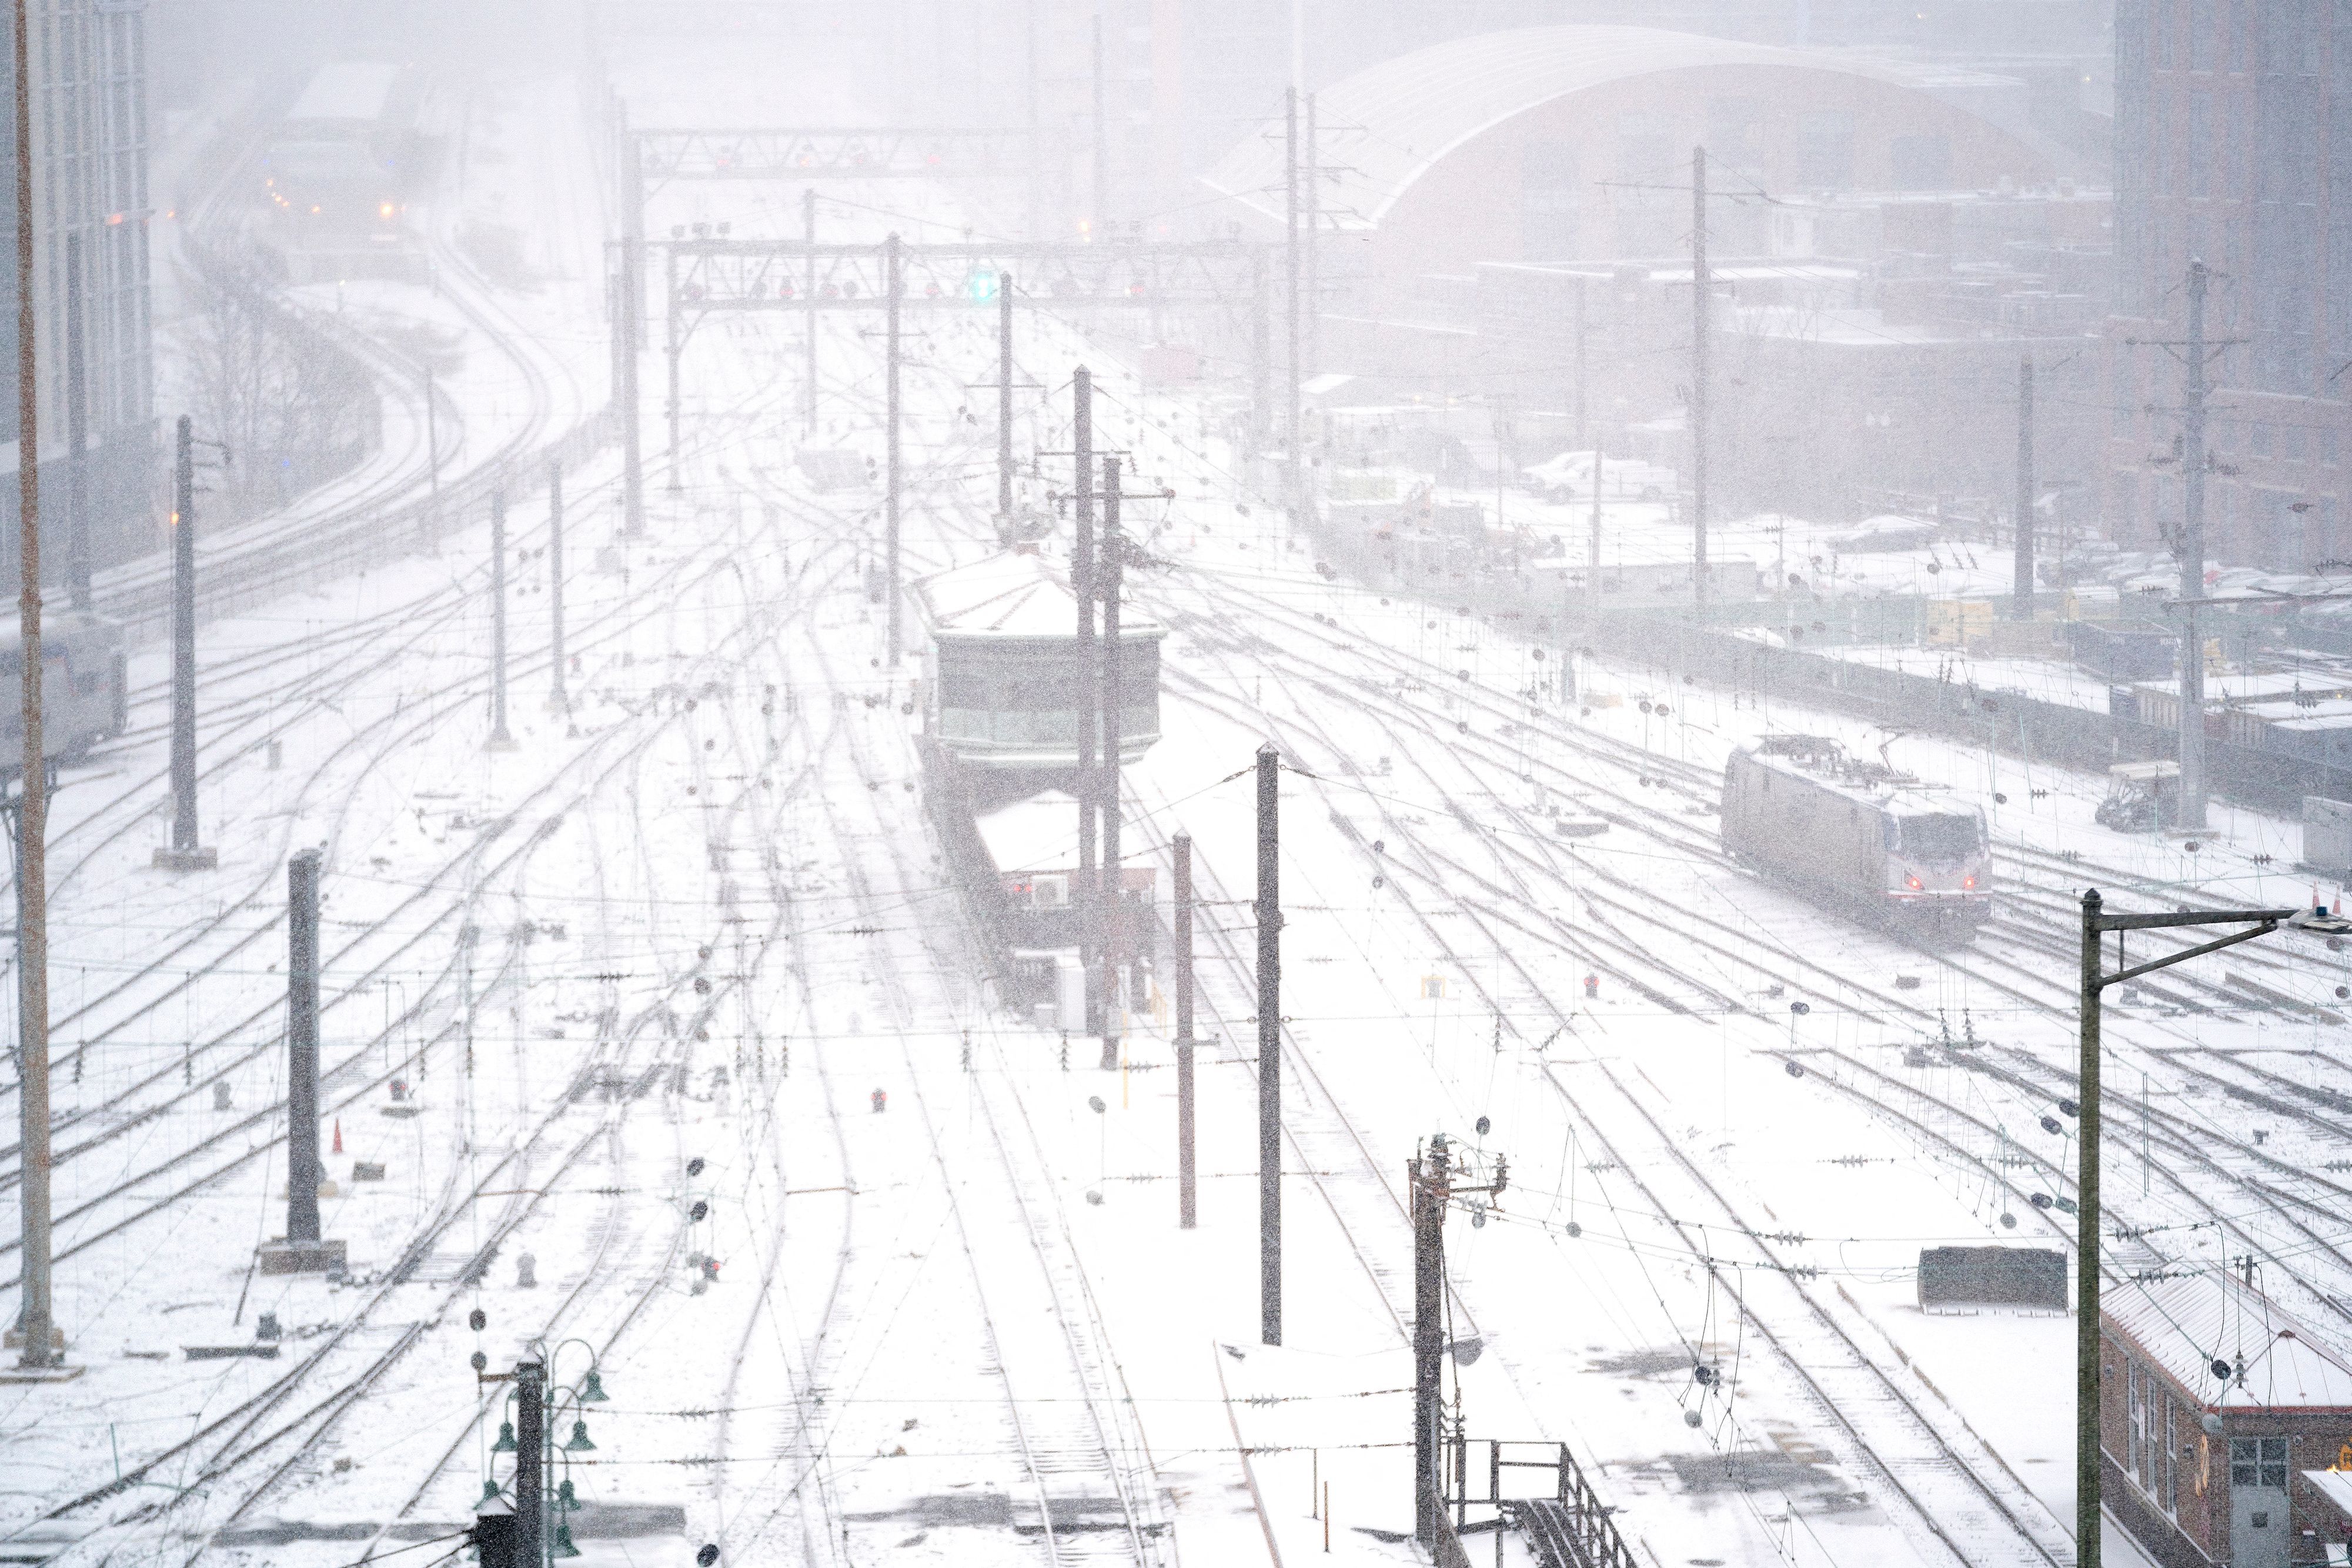 An Amtrak train engine moves along tracks in the train yard at Union Station in Washington, DC, during a winter storm on January 16.